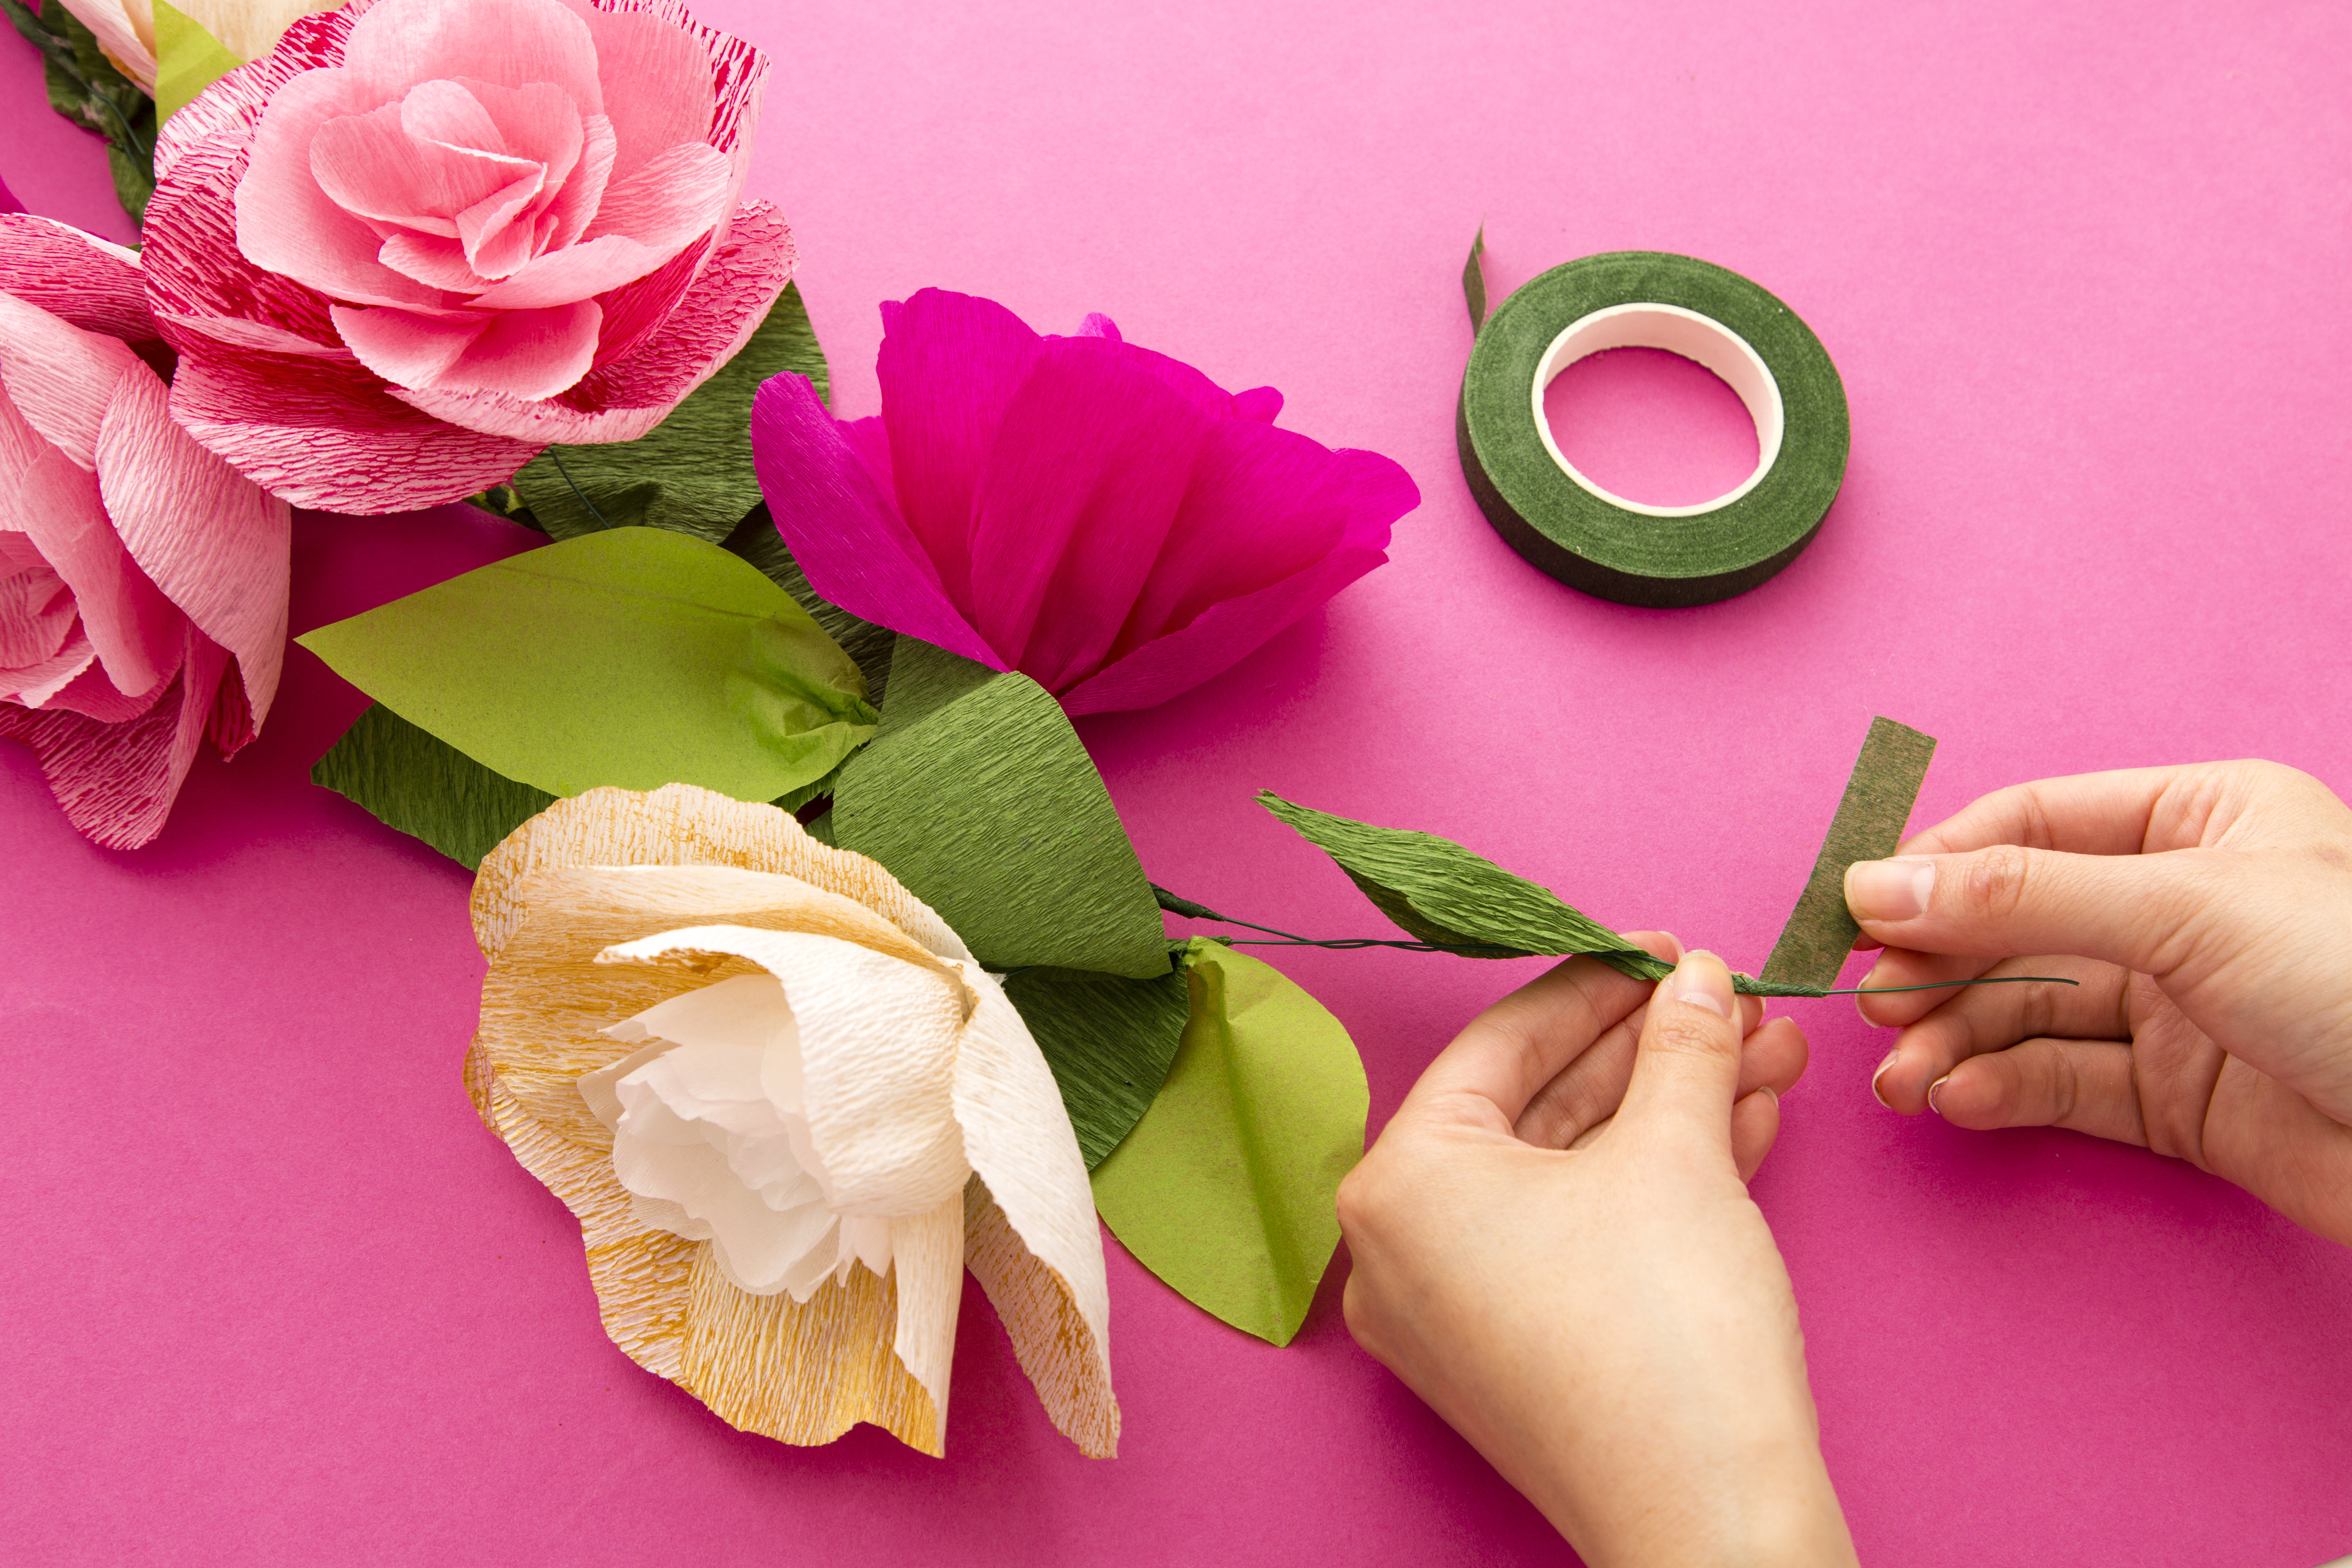 How to make a diy paper flower garland - B+C Guides